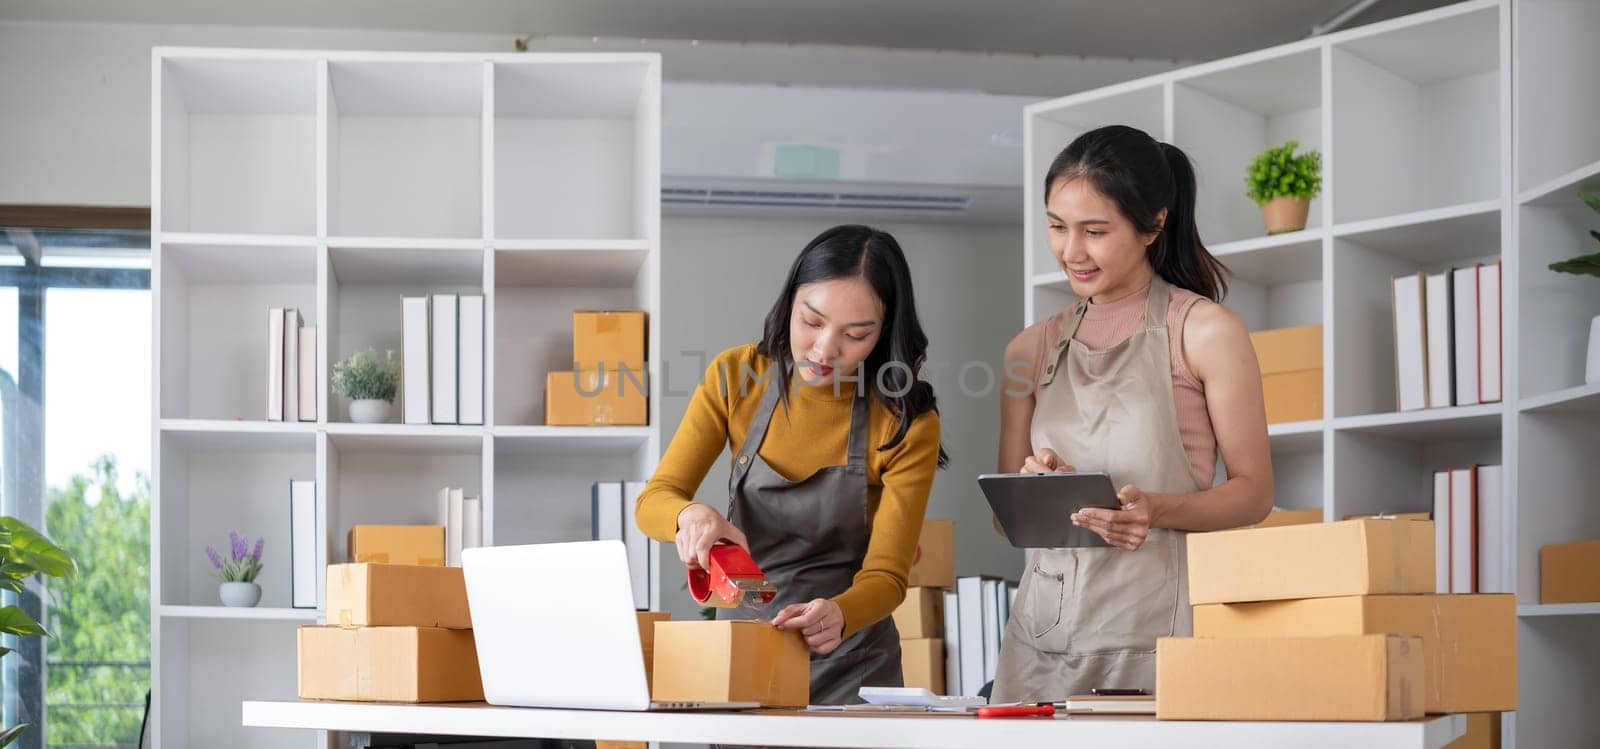 Couple of young Asian women running a small business together selling products online using laptops.